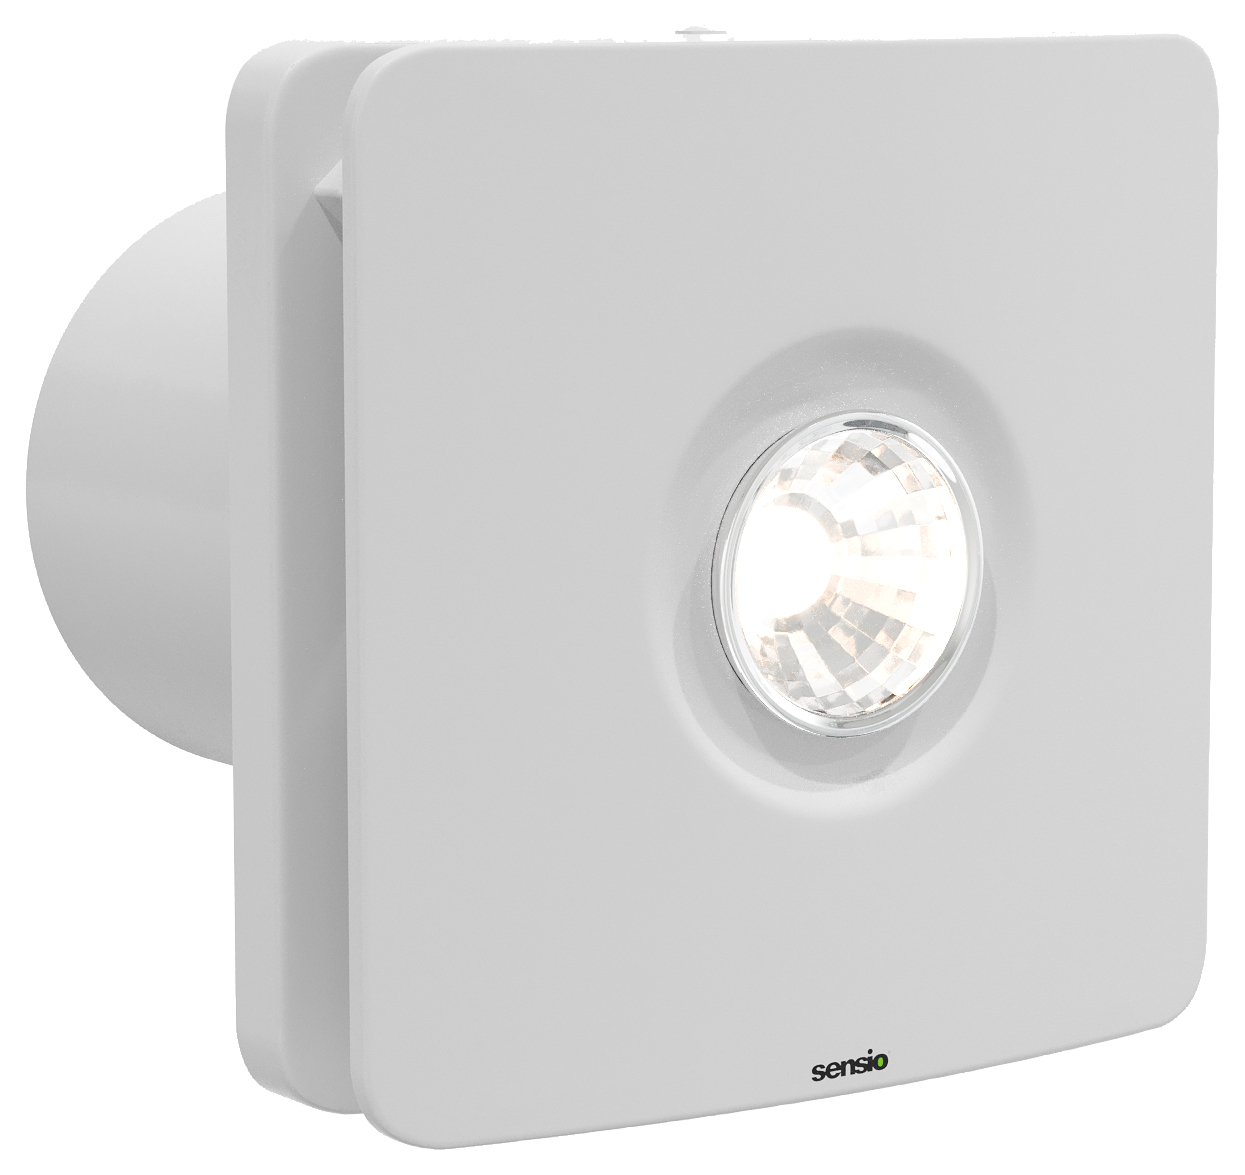 Image of Sensio Remy White Wall Ventilation Fan with Aquilo Ventilation Ducting Kit - ø100mm